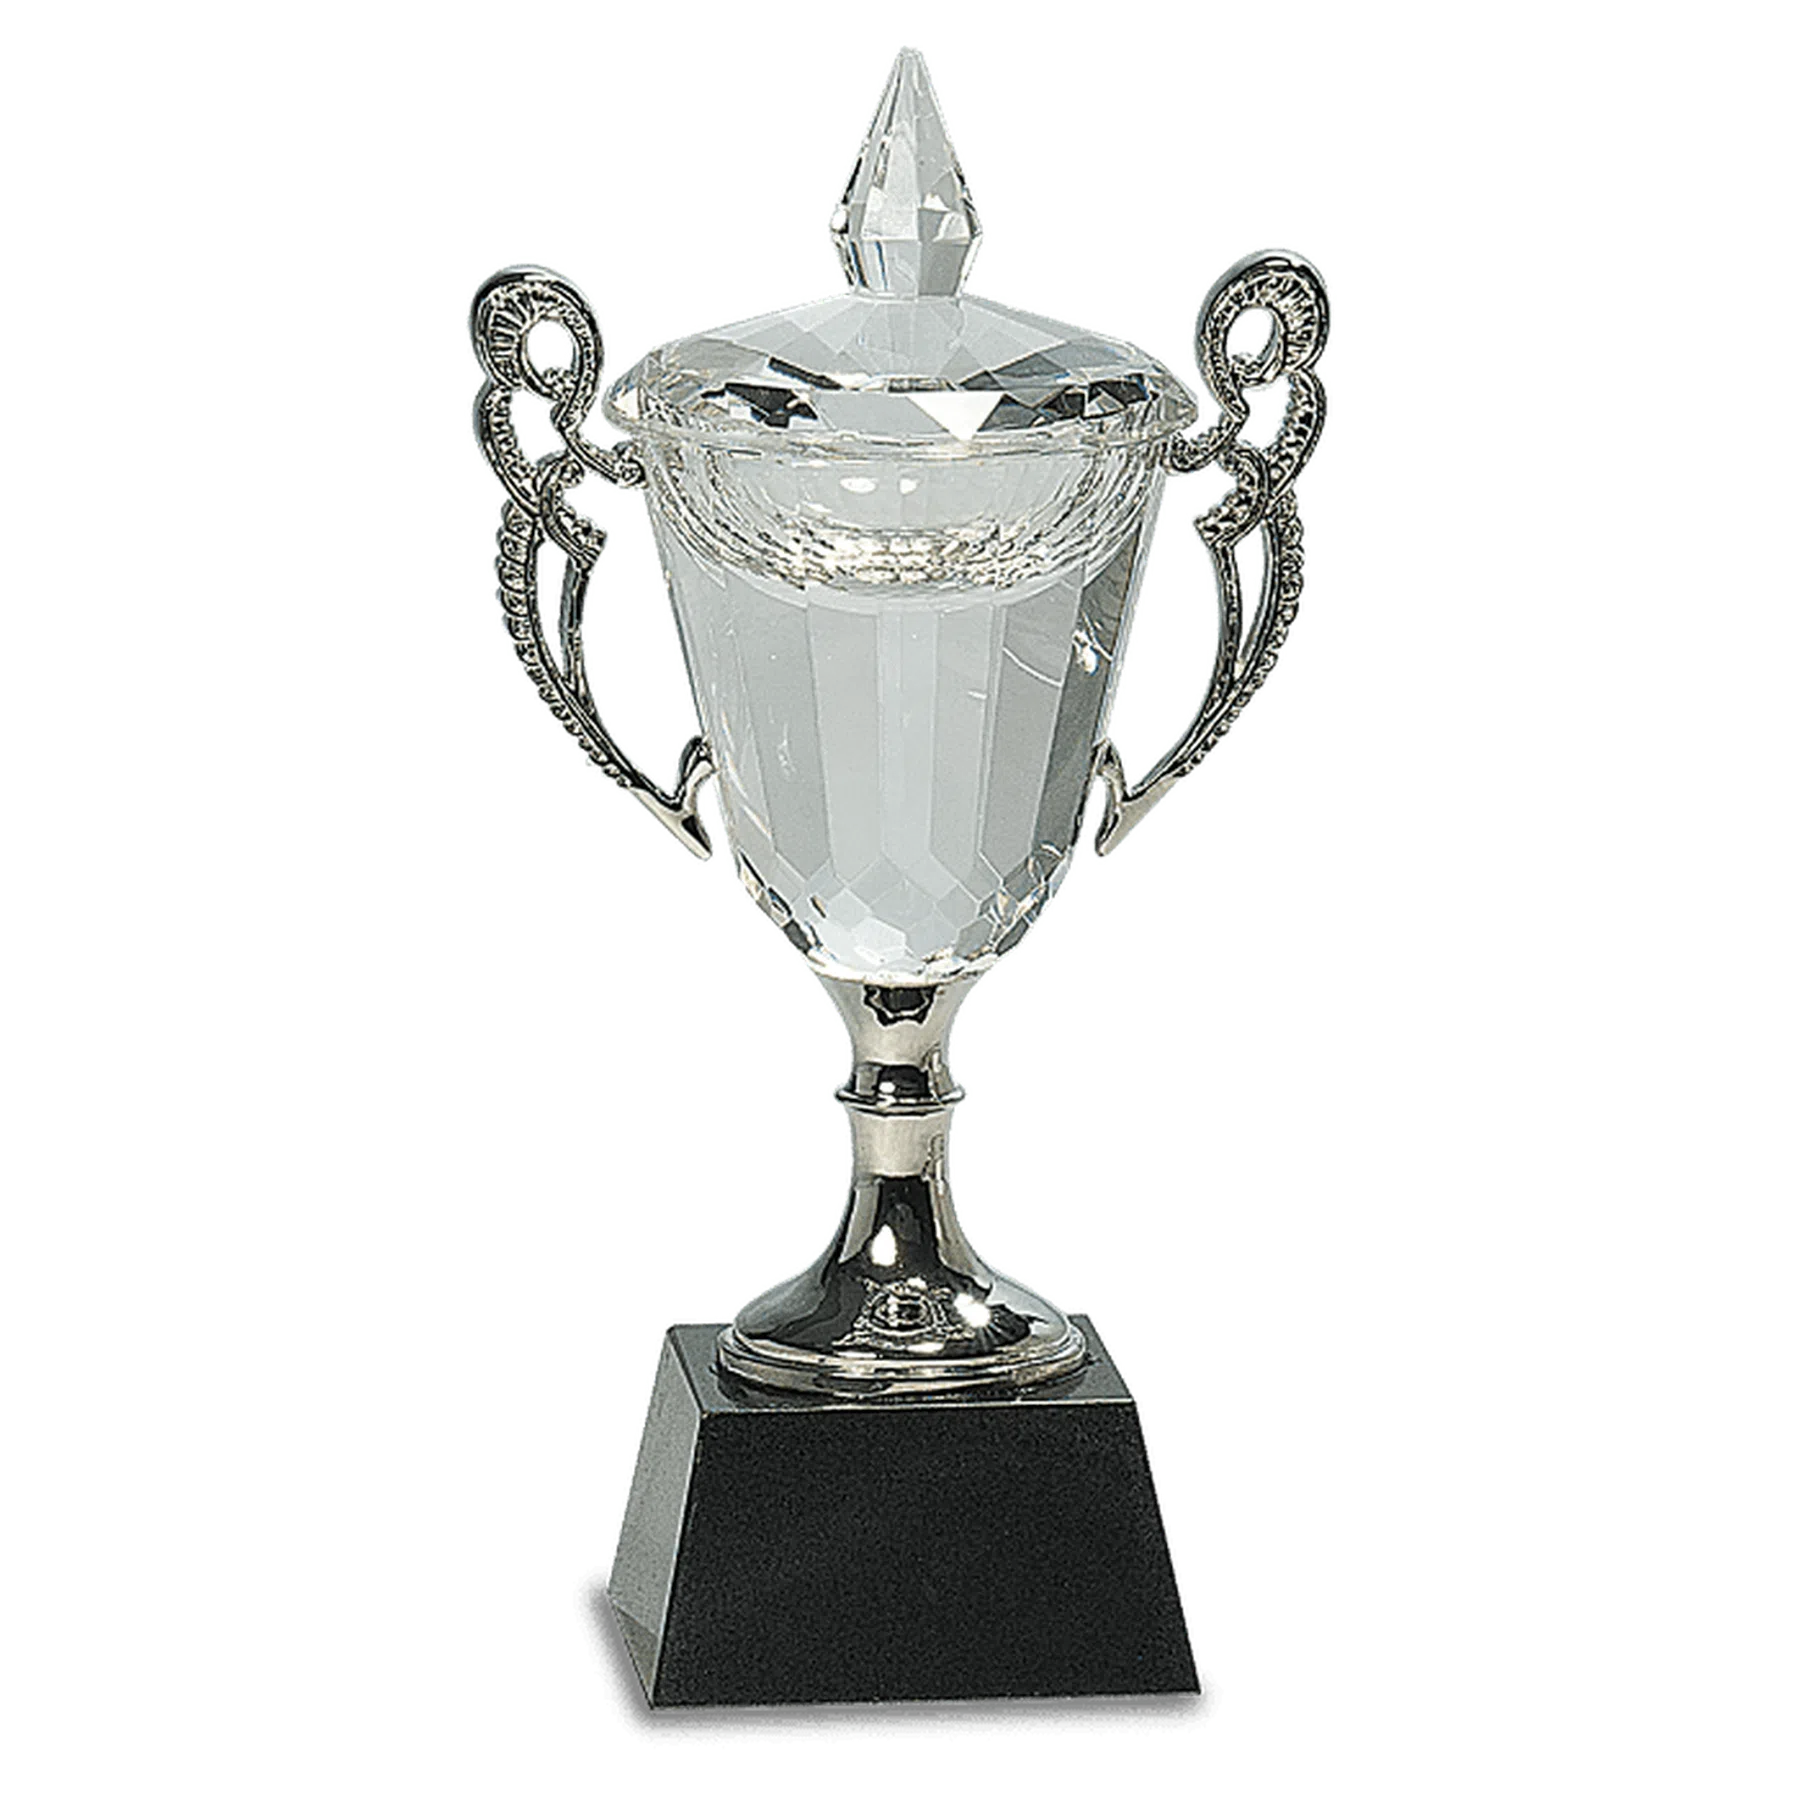 Crystal Trophy Cup with Silver Handles and Stem